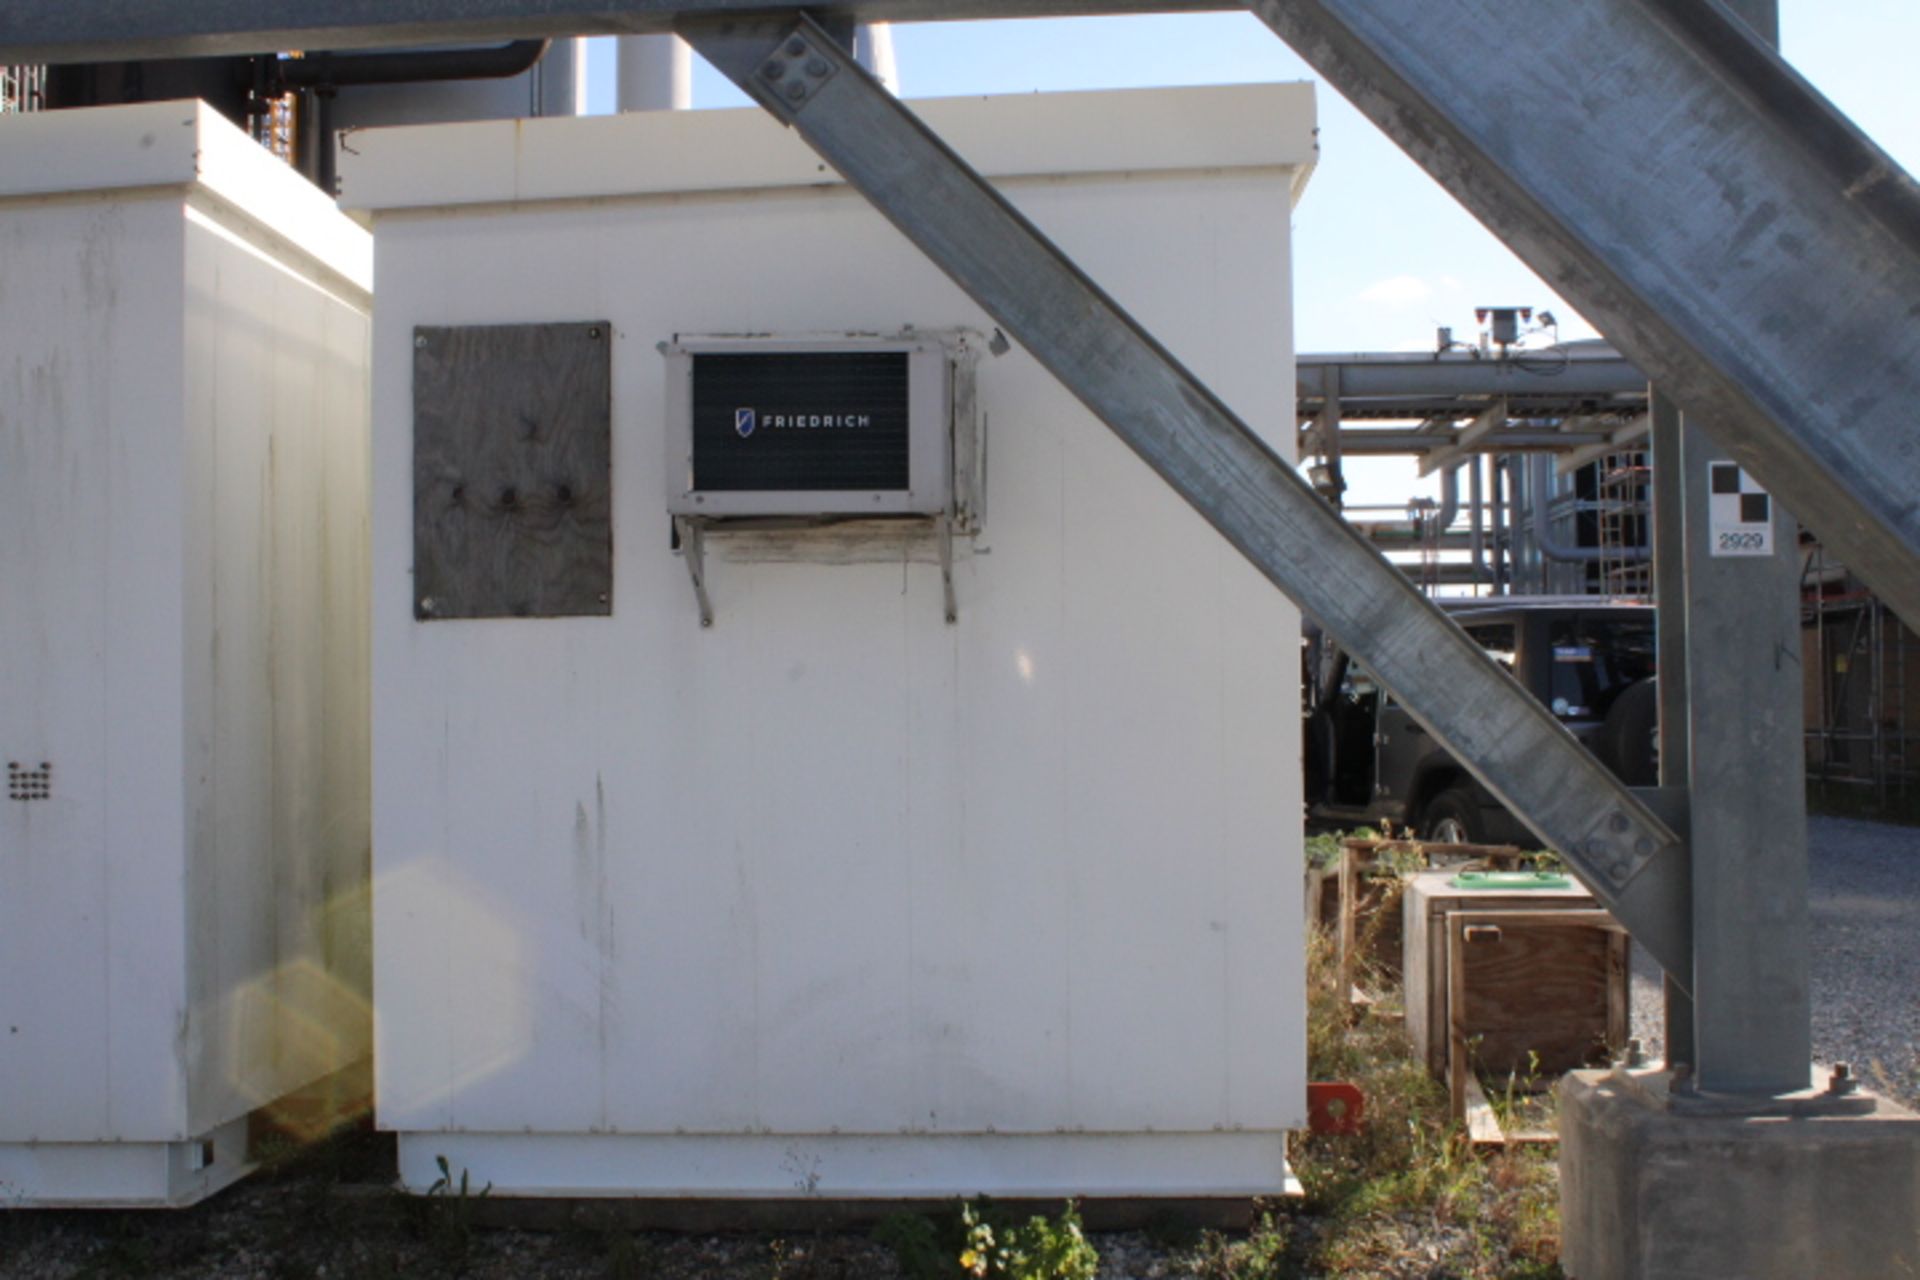 CLIMATE CONTROLLED ANALYZER/PERMIT BUILDING (this lot will require third party removal) (Westlake) - Image 3 of 6